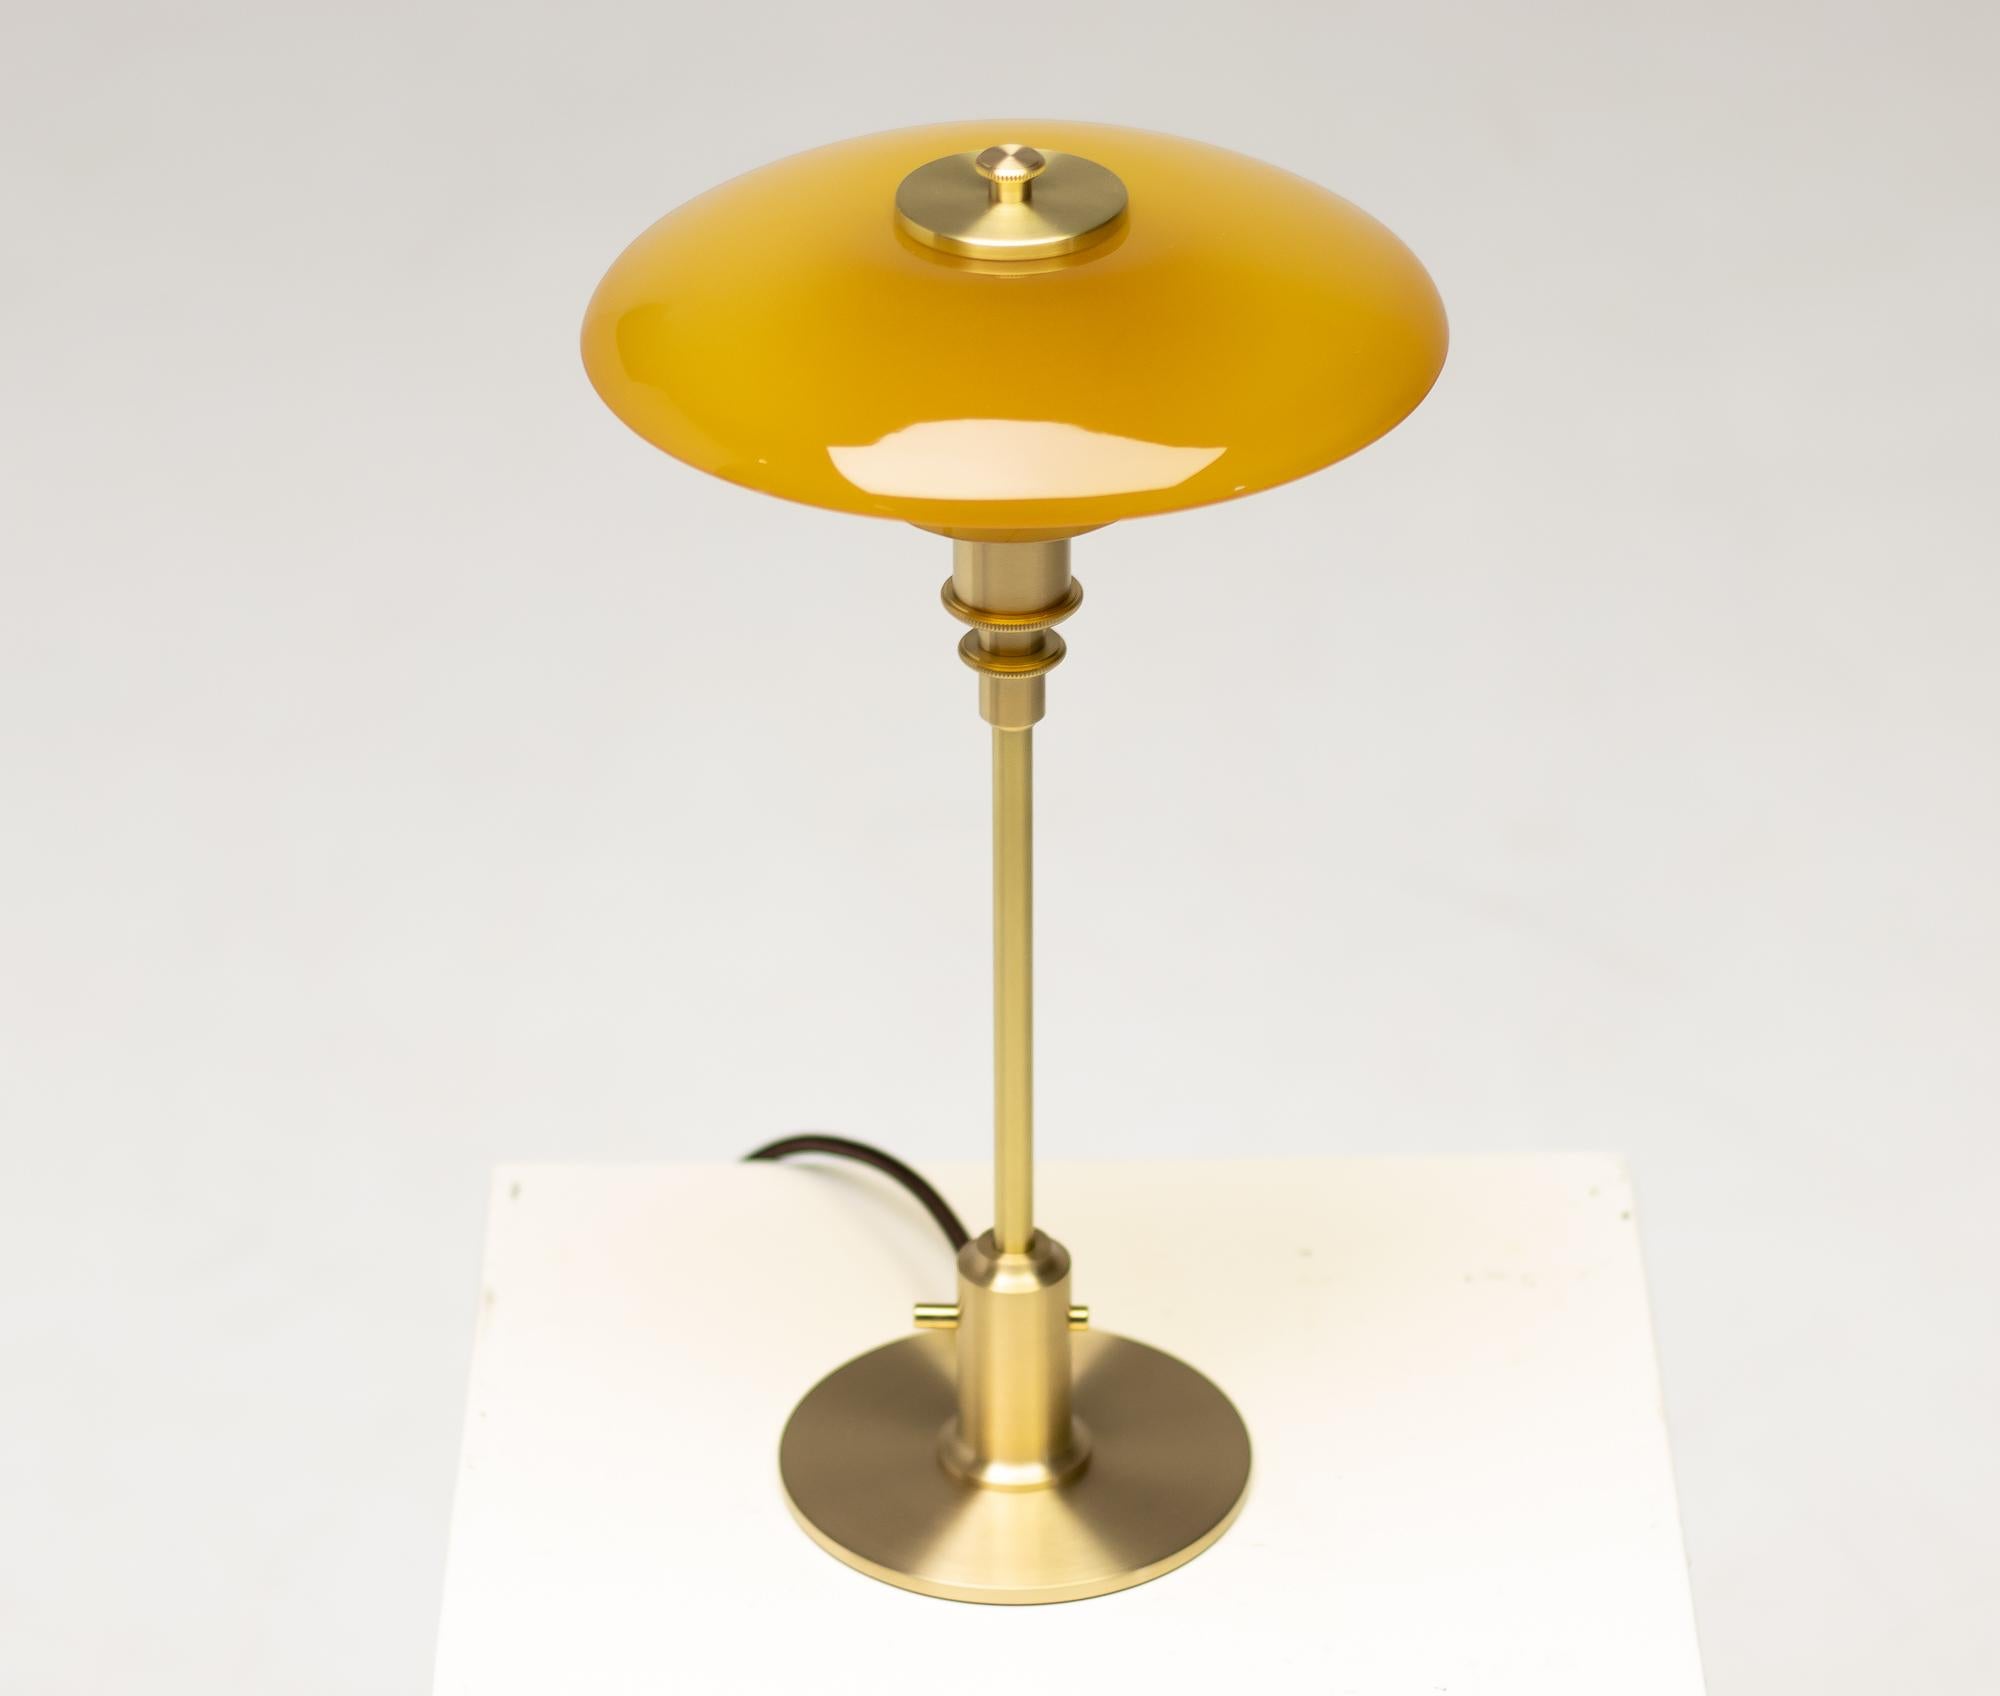 Limited edition table lamp model PH 2/1 with amber glass designed by Poul Henningsen.
Produced by Louis Poulsen in Denmark. Marked Louis Poulsen at the bottom.
PH 2/1 is designed on the principle of a reflecting multi-shade system, creating